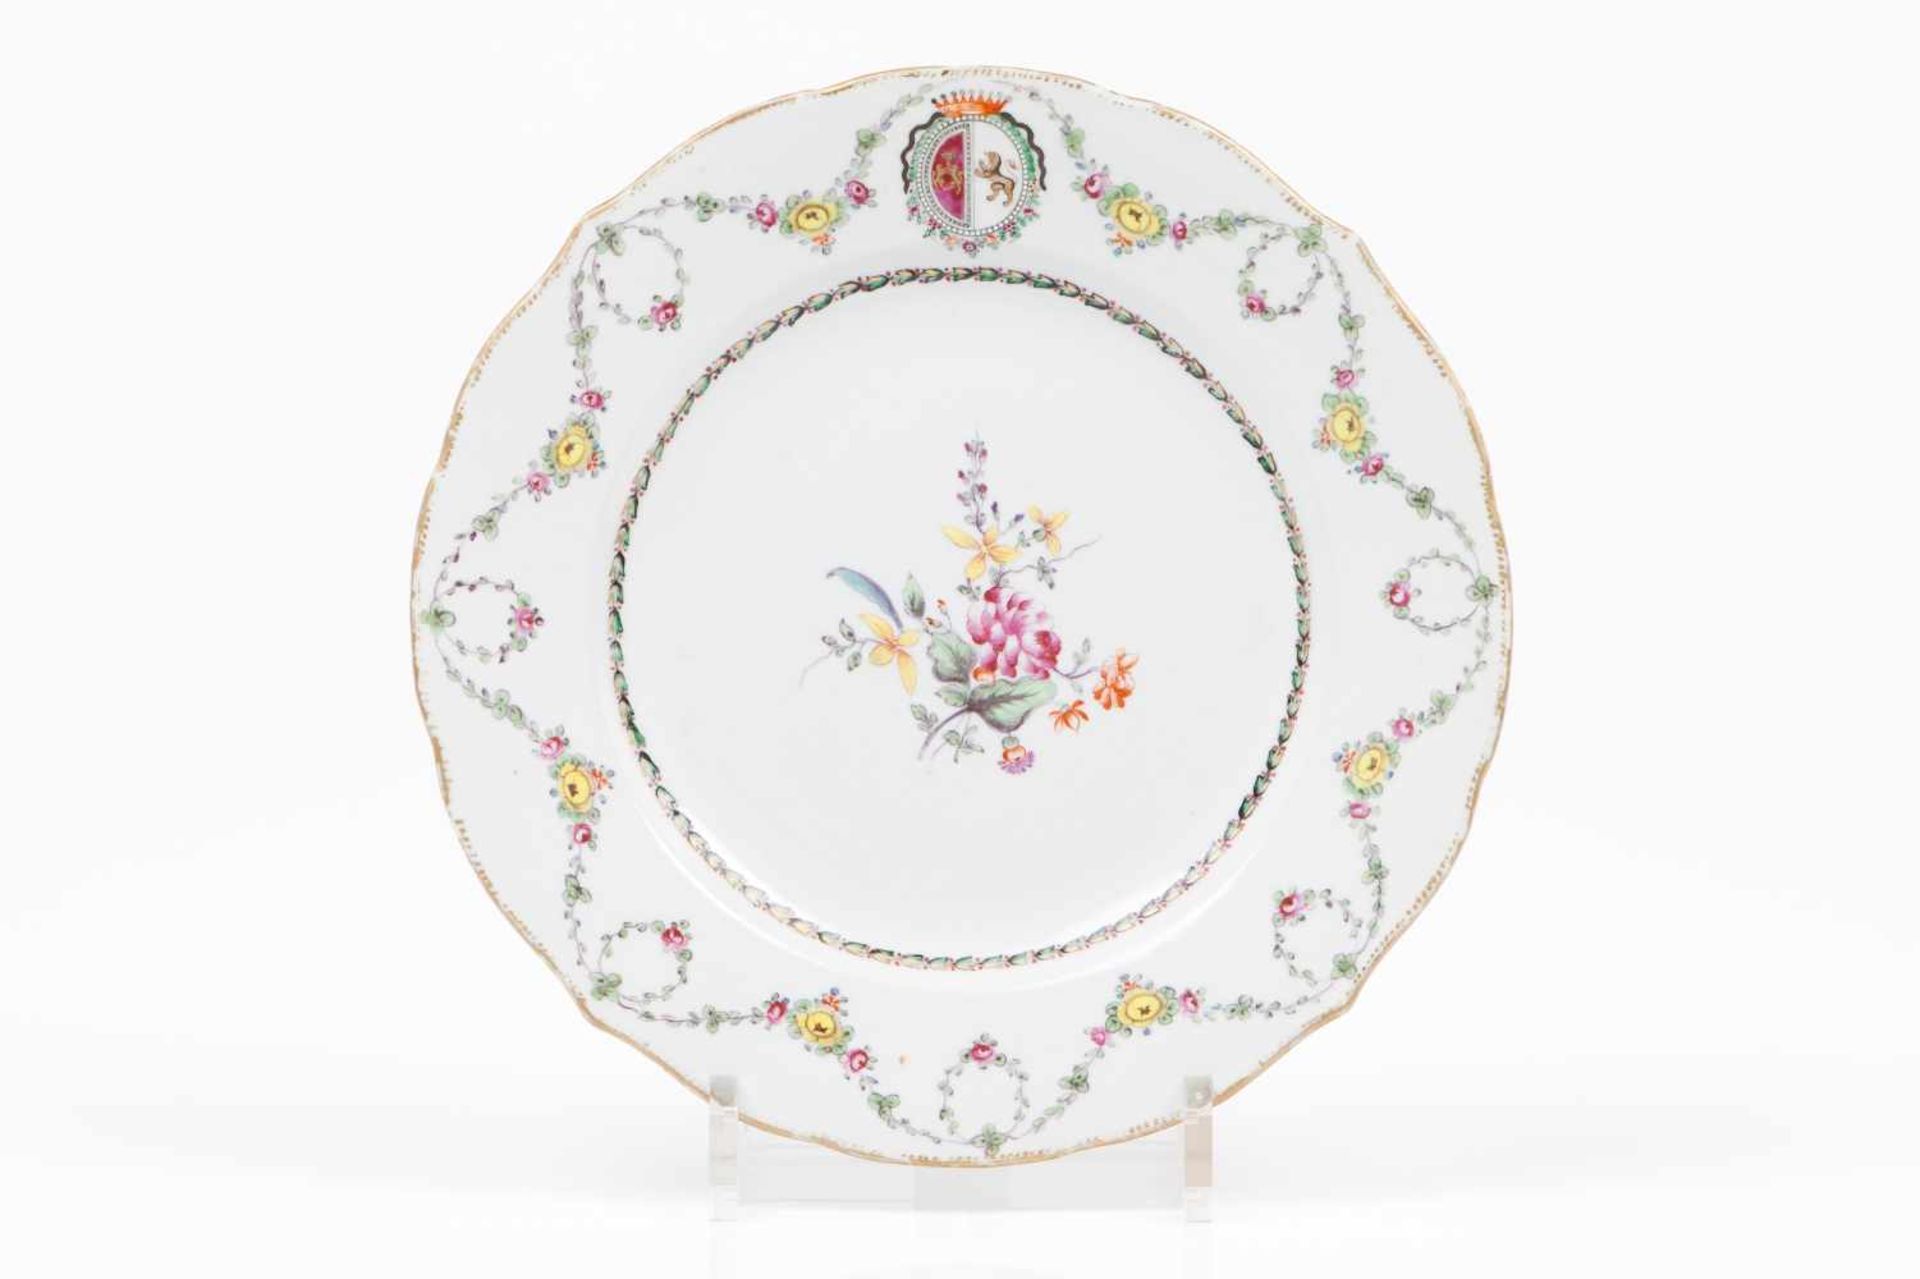 A scalloped plateChinese export porcelain"Famille Rose" polychrome and gilt decoration with armorial